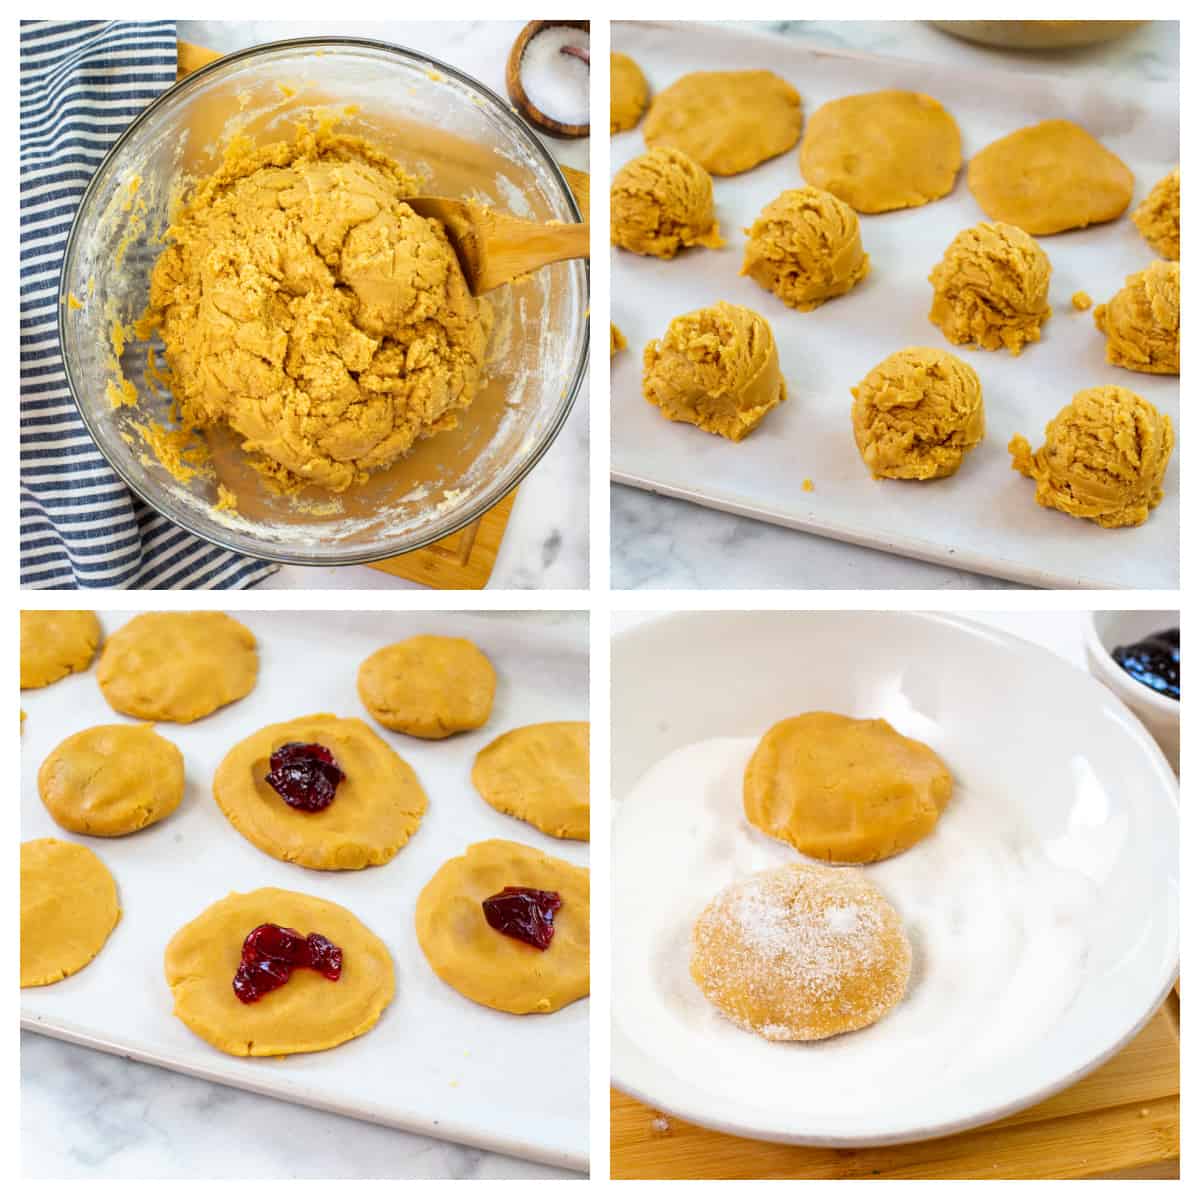 Collage showing how to make peanut butter and jelly cookies.